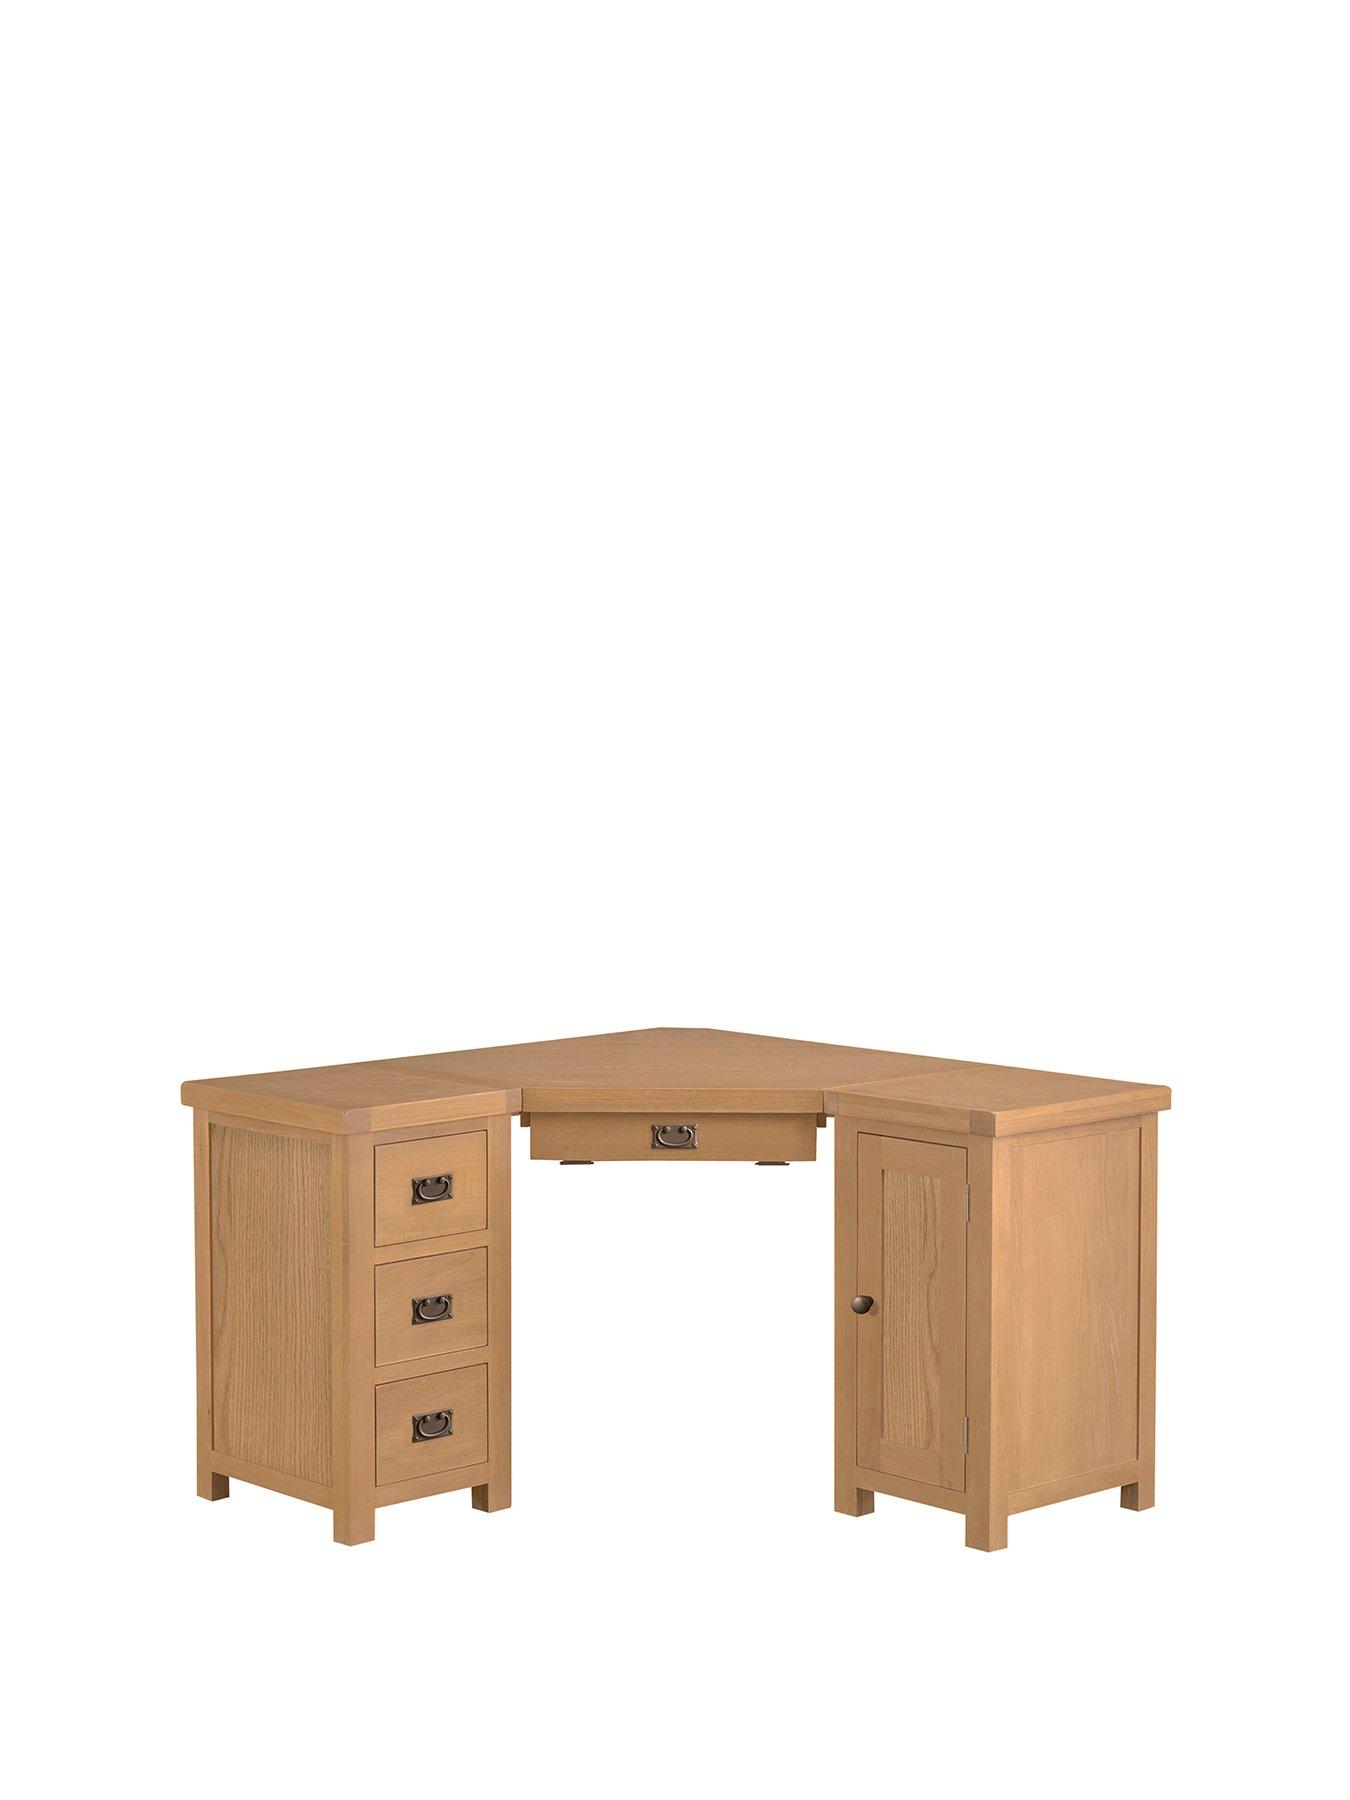 595 MM 745 MM; Width Workstation Oak With Drawer By Ready Office 1200 MM; Depth Color Height Oak 